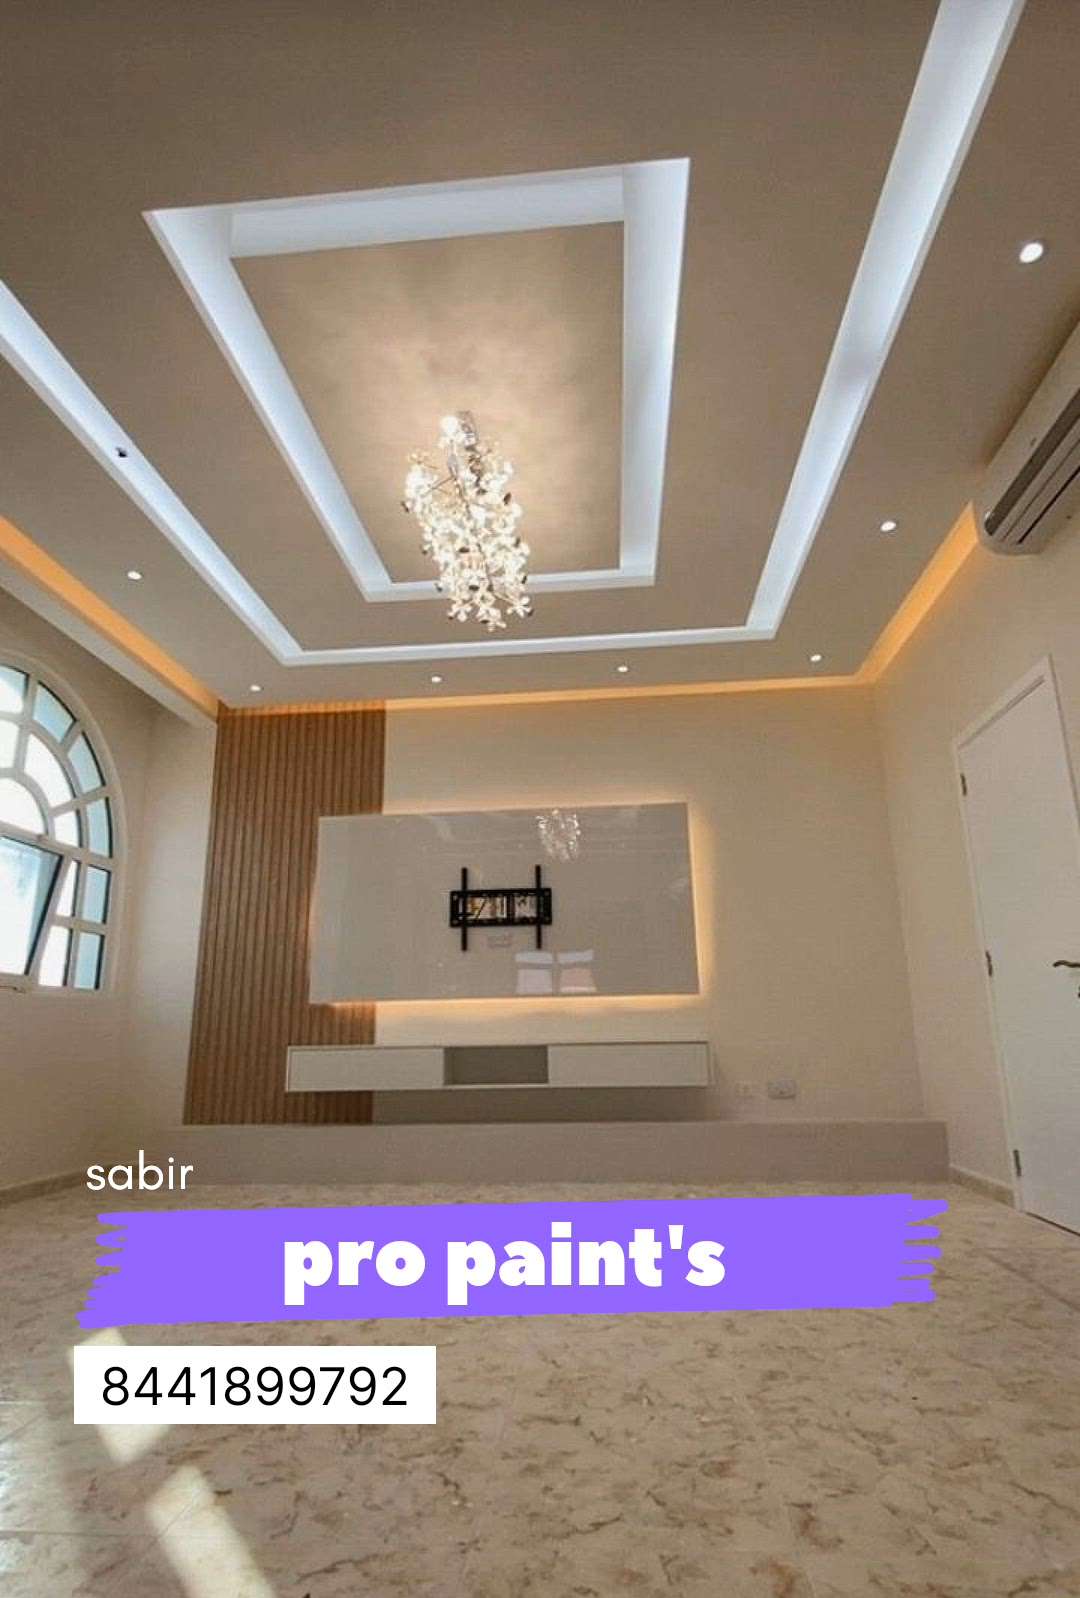 jaipur pop work #POP_Moding_With_Texture_Paint #popcontractor #popdesine  #popwor good quality luxury work with gournted 15 years any type colour pop work with low budget fabulous work qoulety #jaipur #popfallceiling to